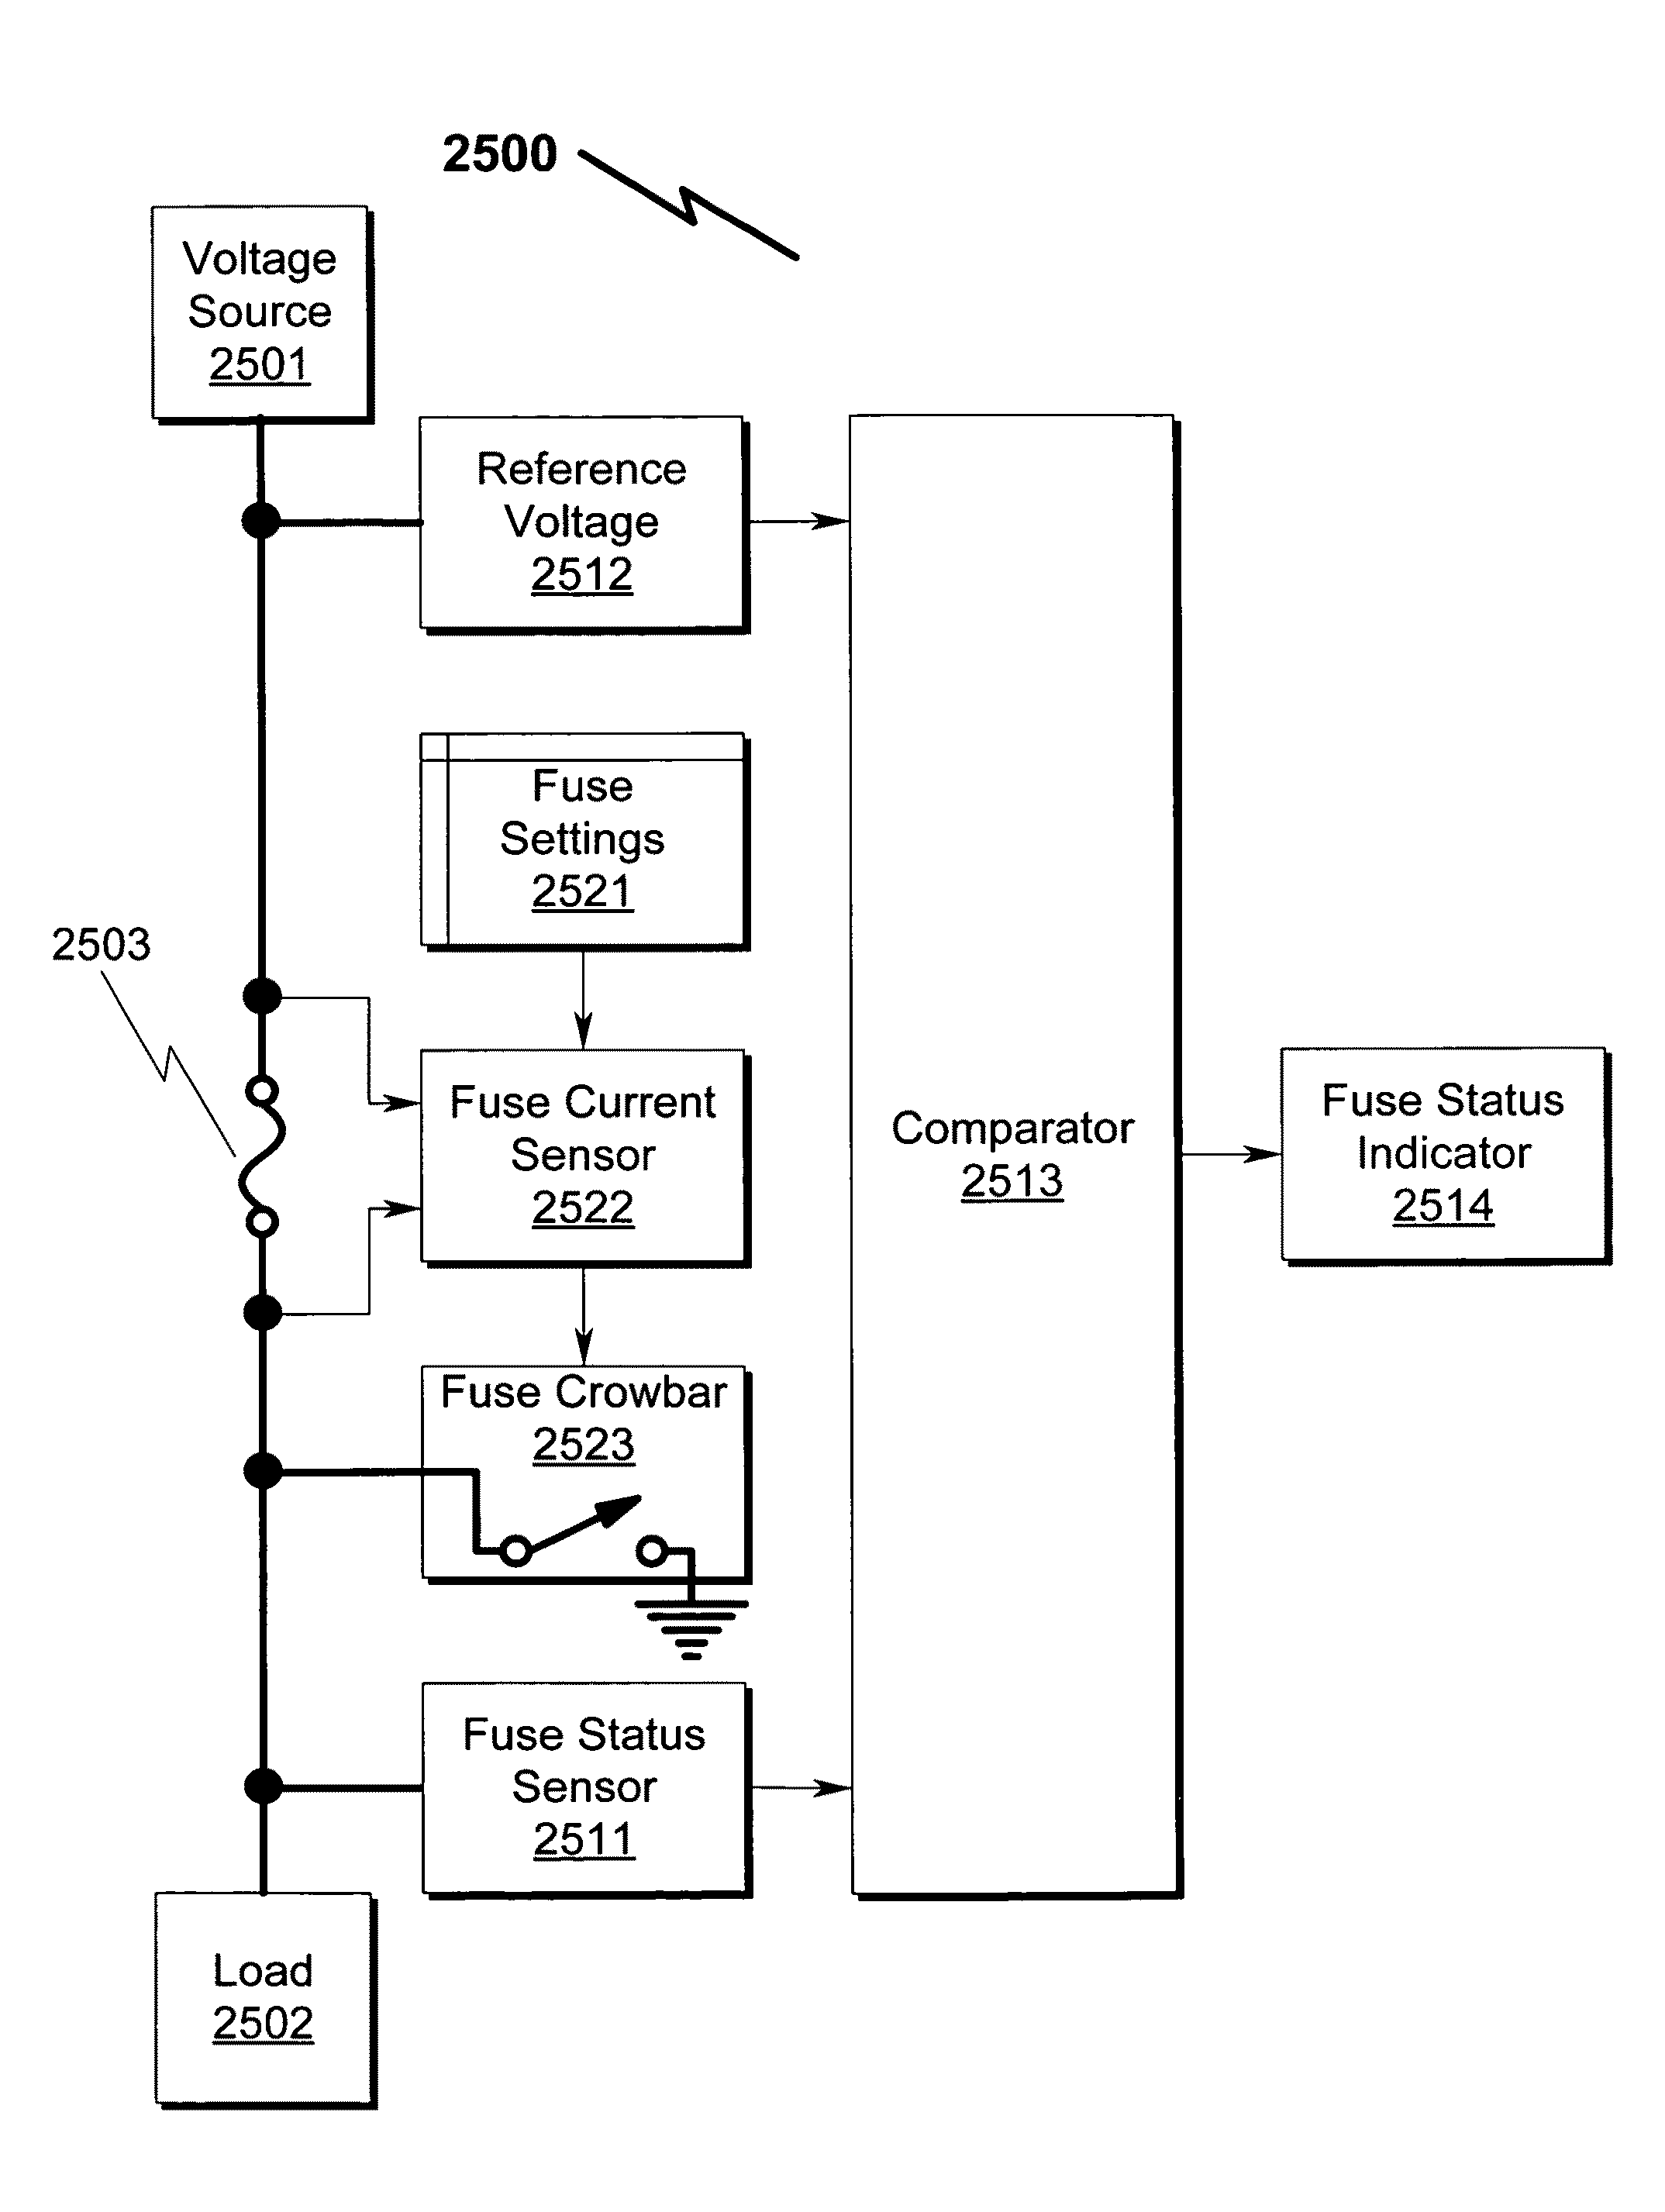 Fuse box system and method